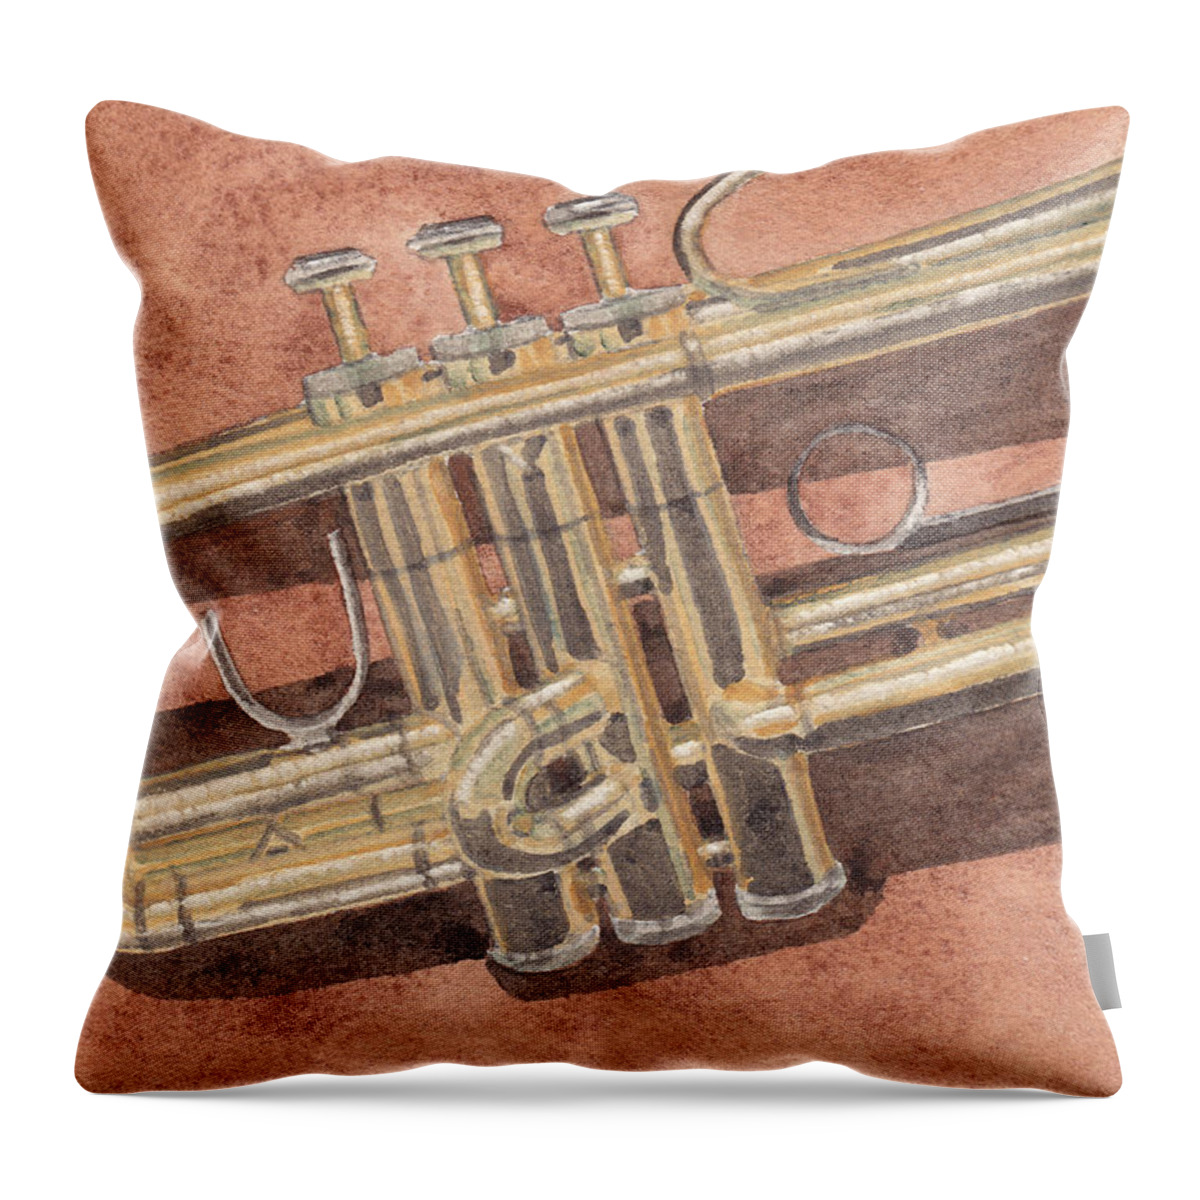 Trumpet Throw Pillow featuring the painting Trumpet by Ken Powers